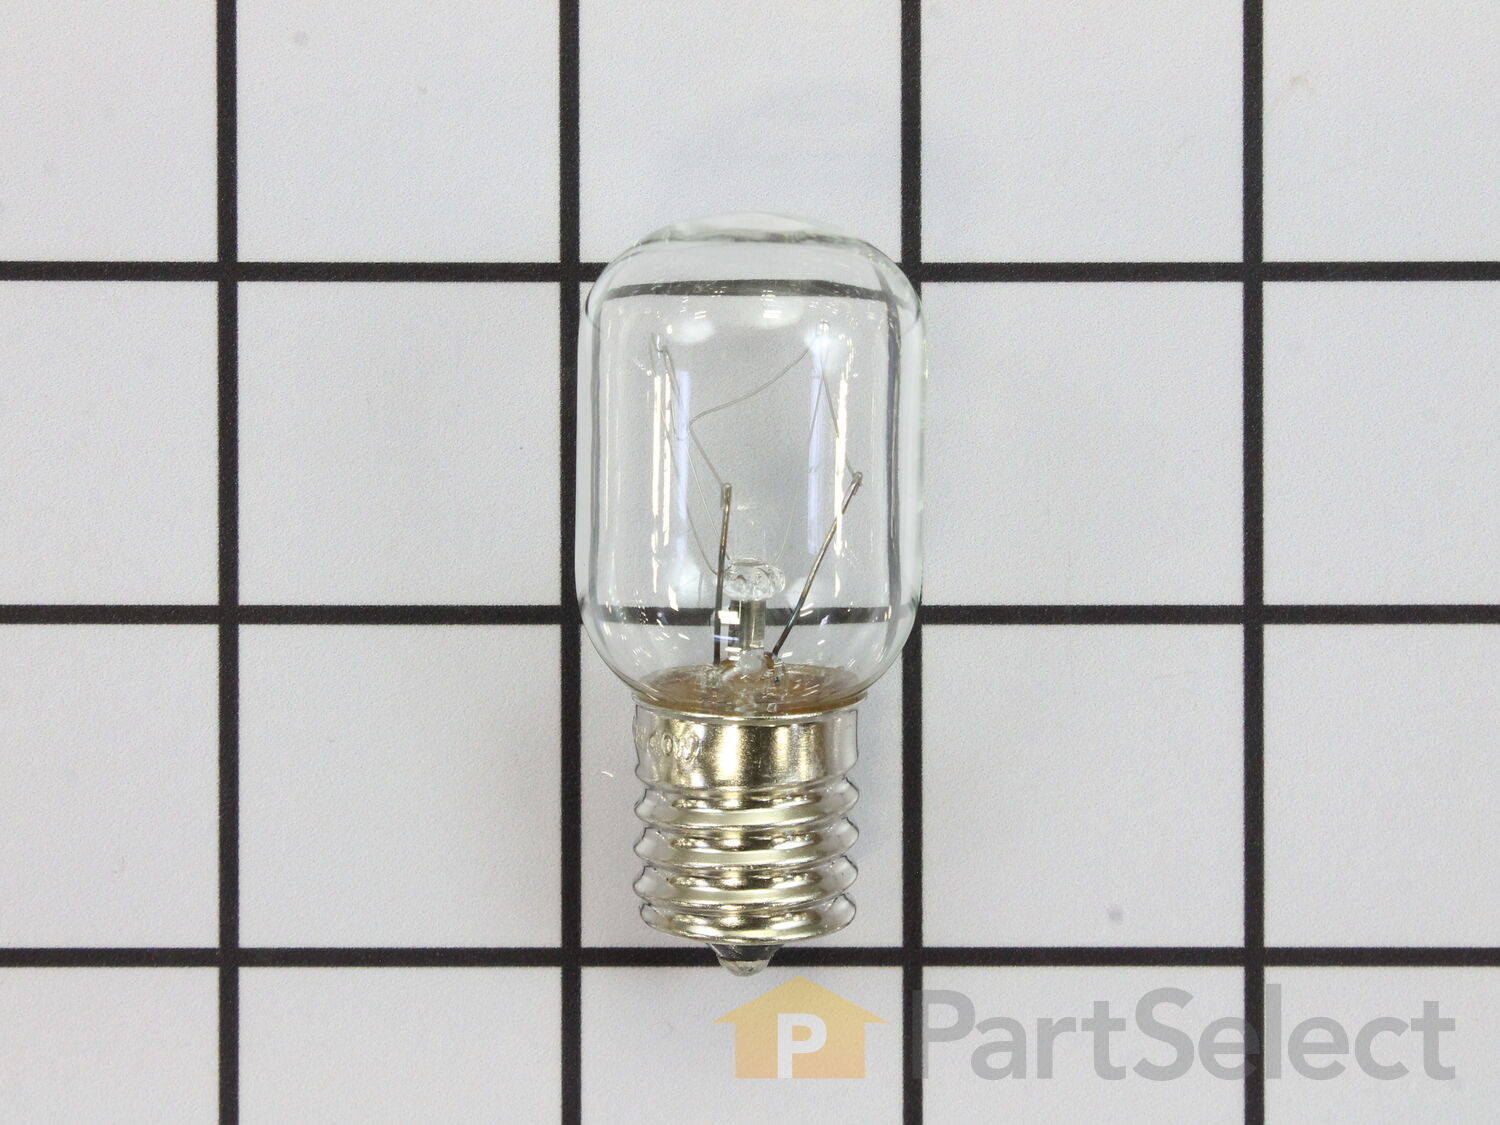 Microwave Light Bulb 40W 125V Replacement Part #8206232A Fit for Whirlpool  